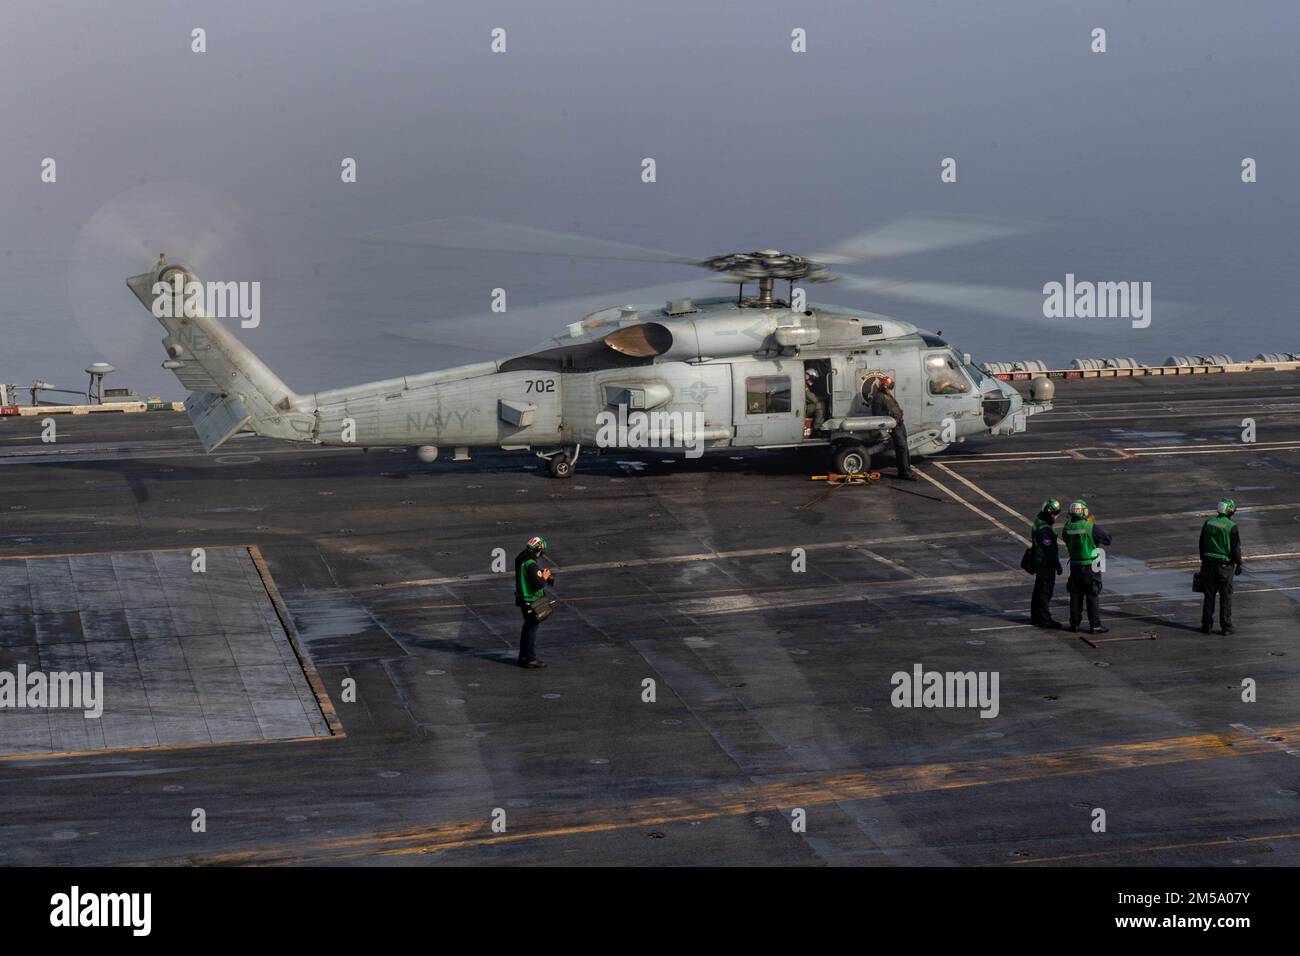 220213-N-YN807-1099 PACIFIC OCEAN (Feb. 13, 2022) An MH-60R Sea Hawk, assigned to the “Blue Hawks” of Helicopter Maritime Strike Squadron (HSM) 78, prepares to take off from the flight deck of Nimitz-class aircraft carrier USS Carl Vinson (CVN 70), Feb. 13, 2022. Vinson is currently conducting routine maritime operations in U.S. 3rd Fleet. Stock Photo